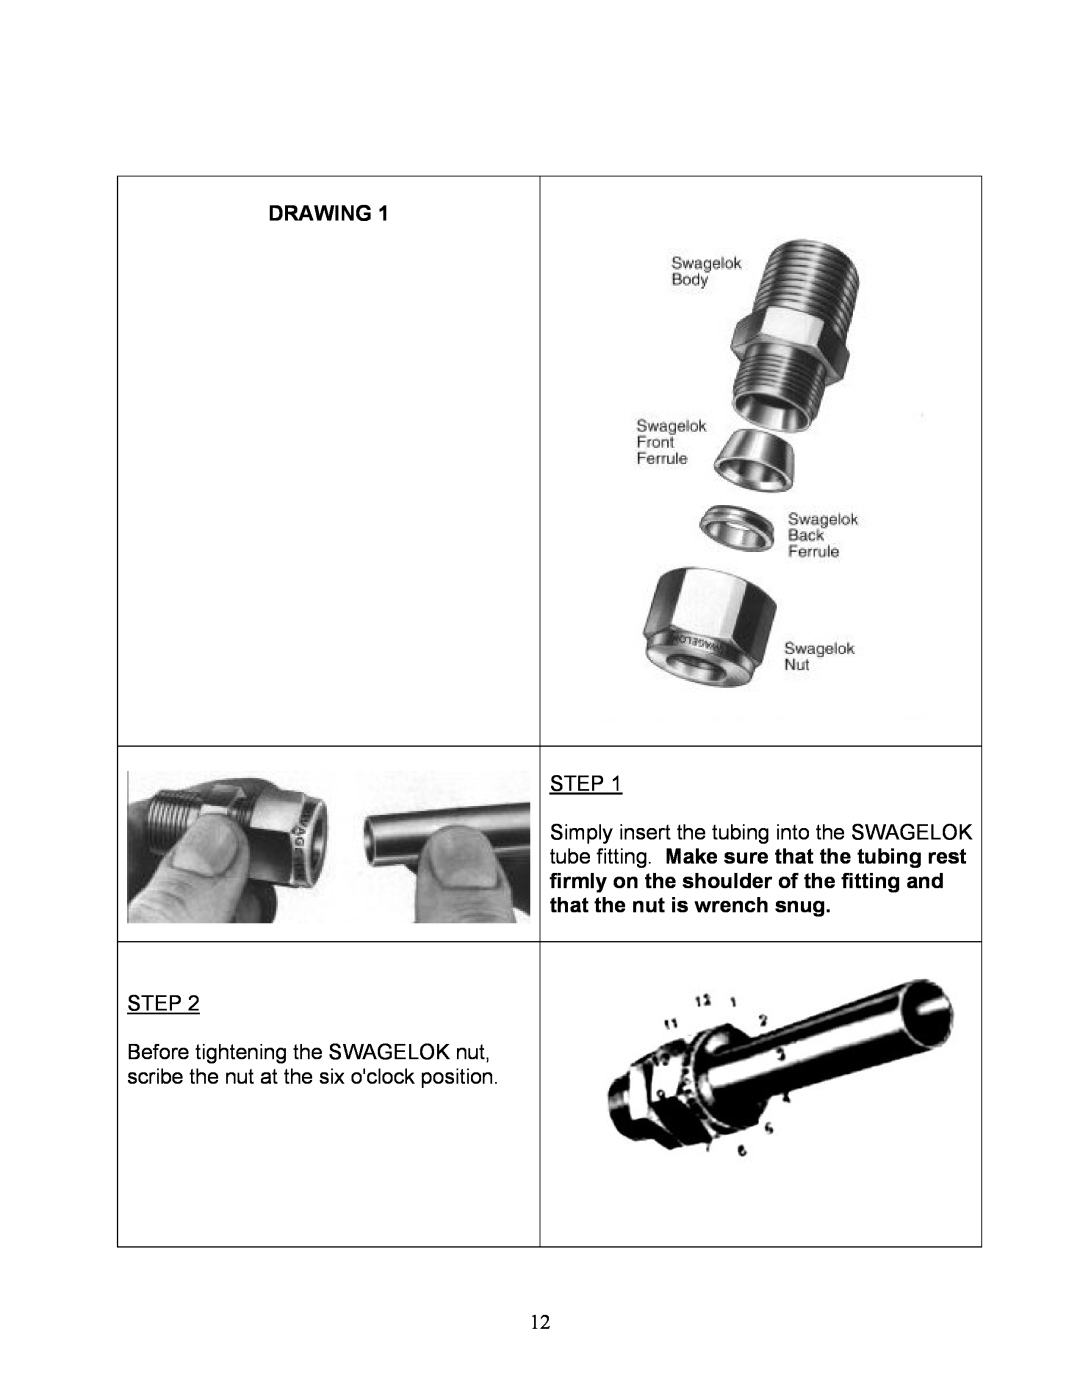 Sea Frost BG 2000 installation instructions Drawing, Step 